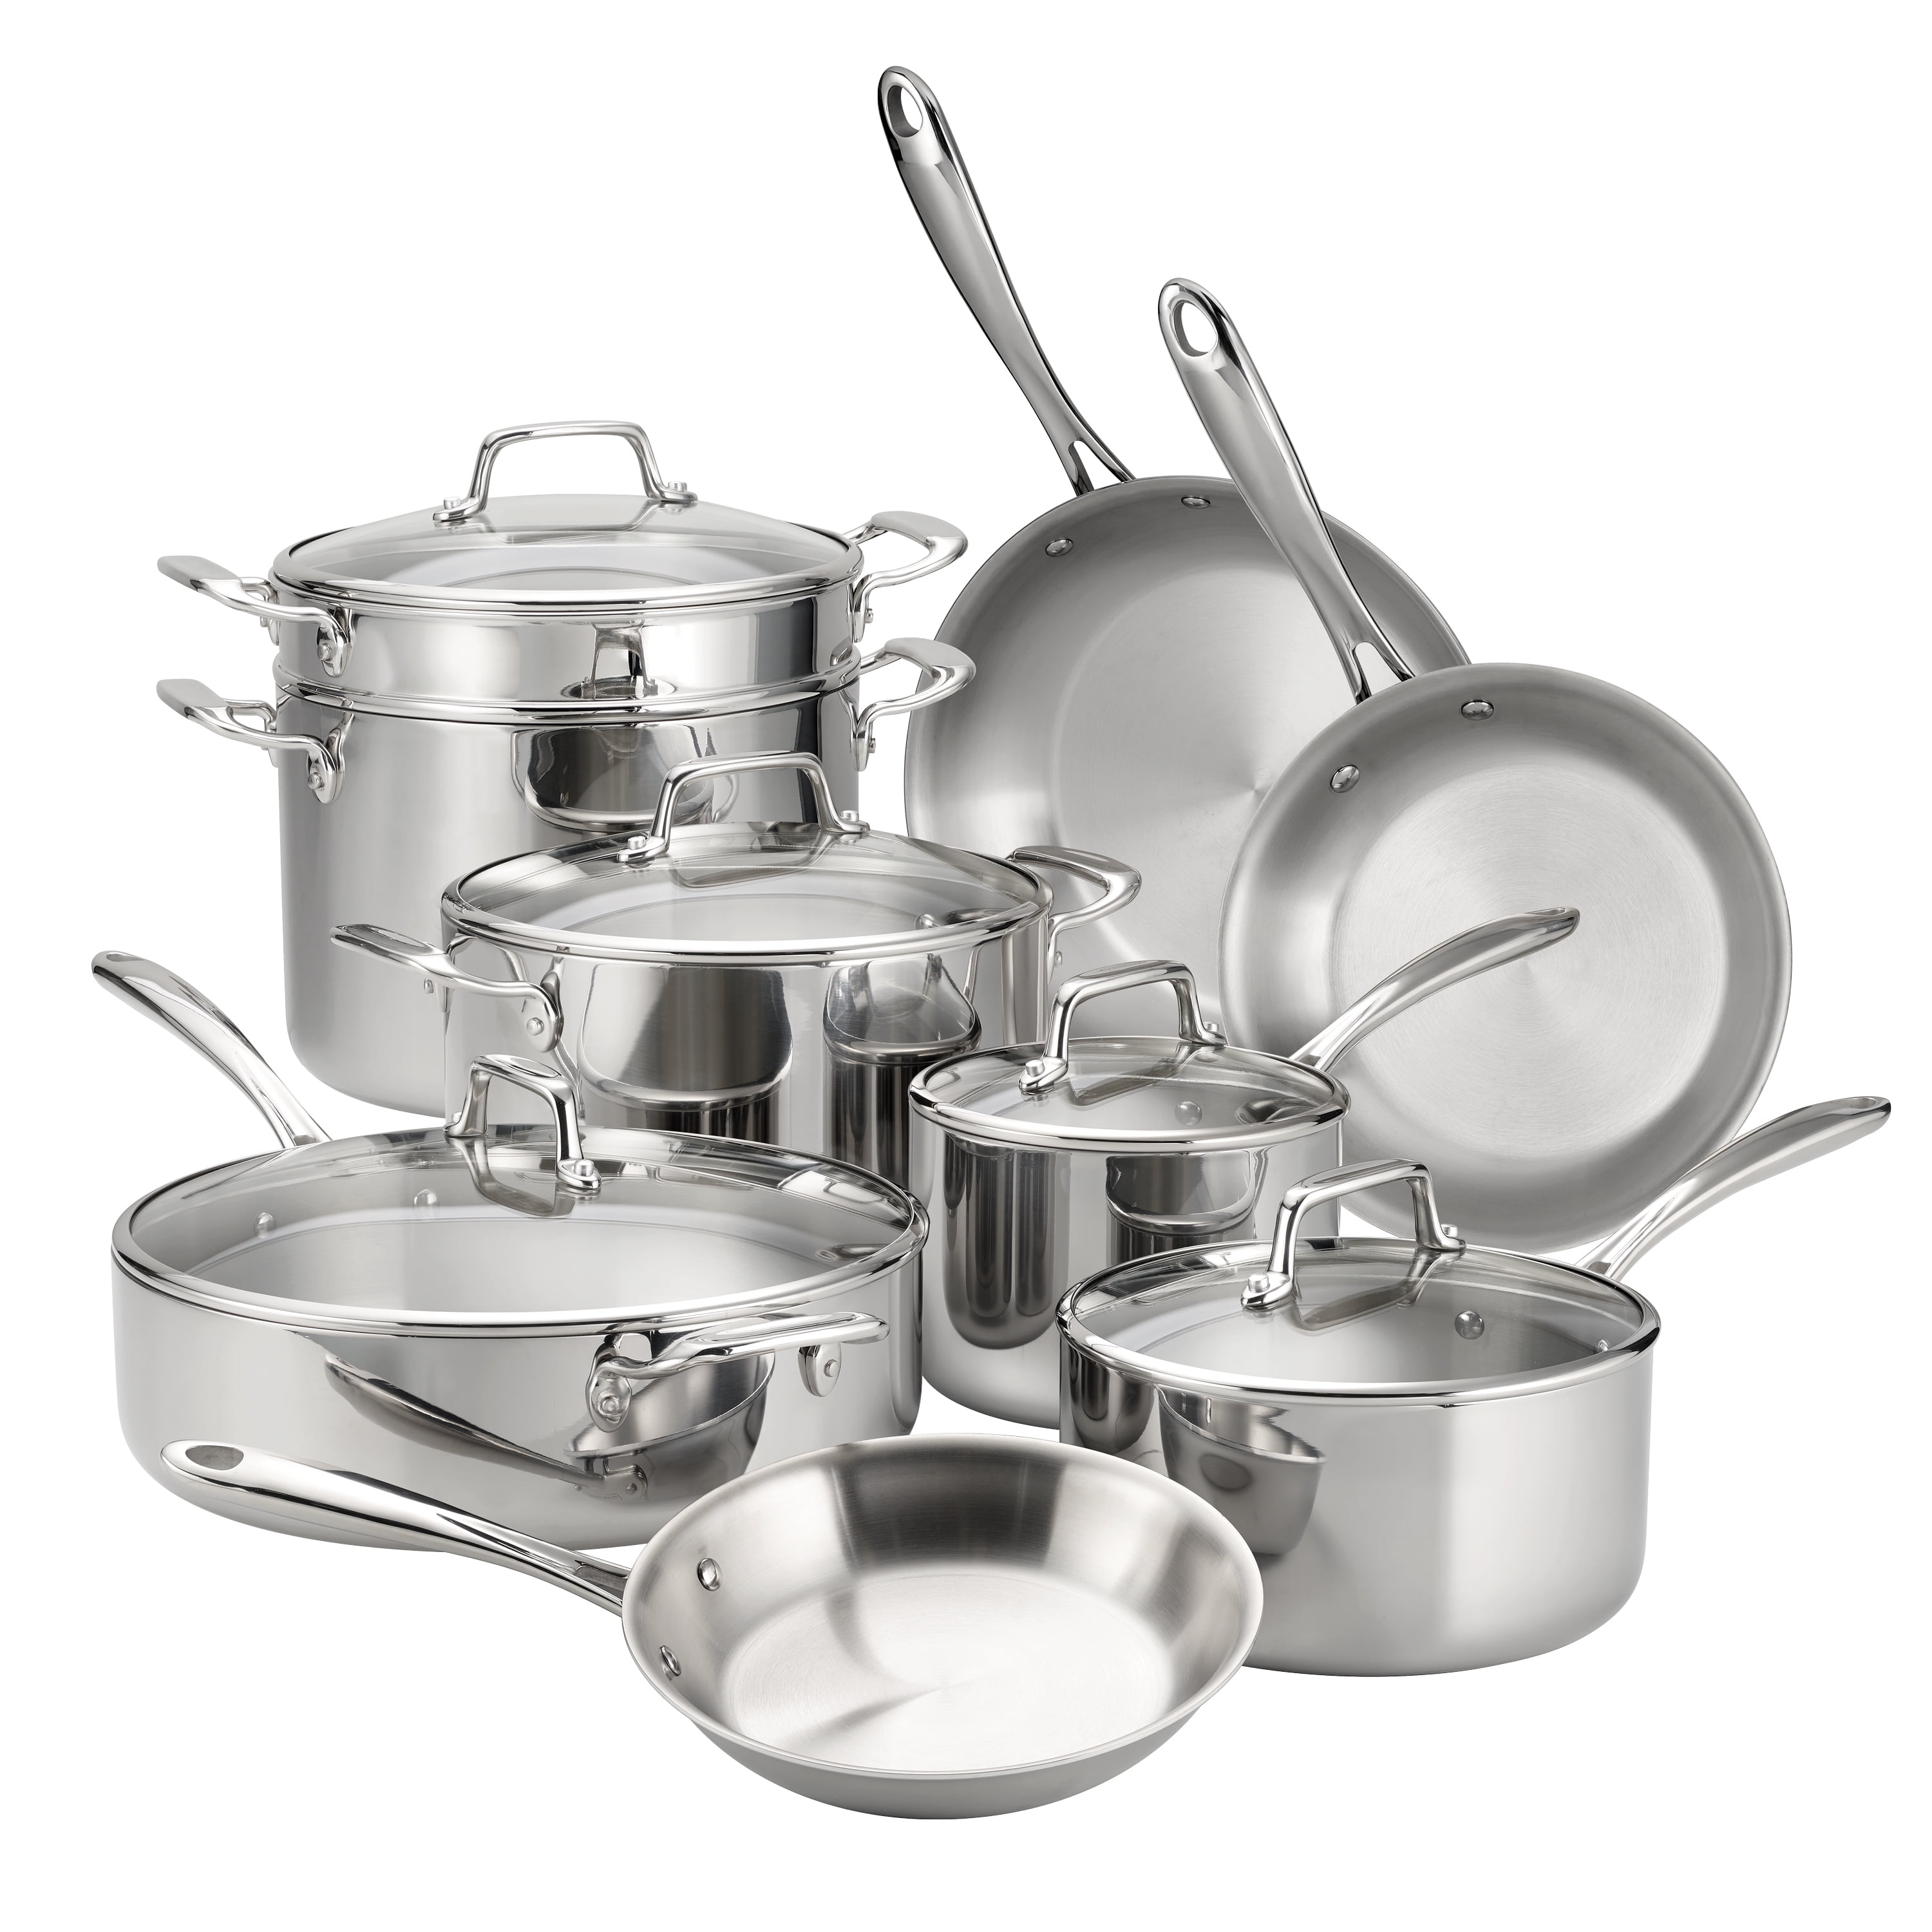 12 Piece NEW Tramontina Gourmet Stainless Steel Tri-Ply Base Cookware Set